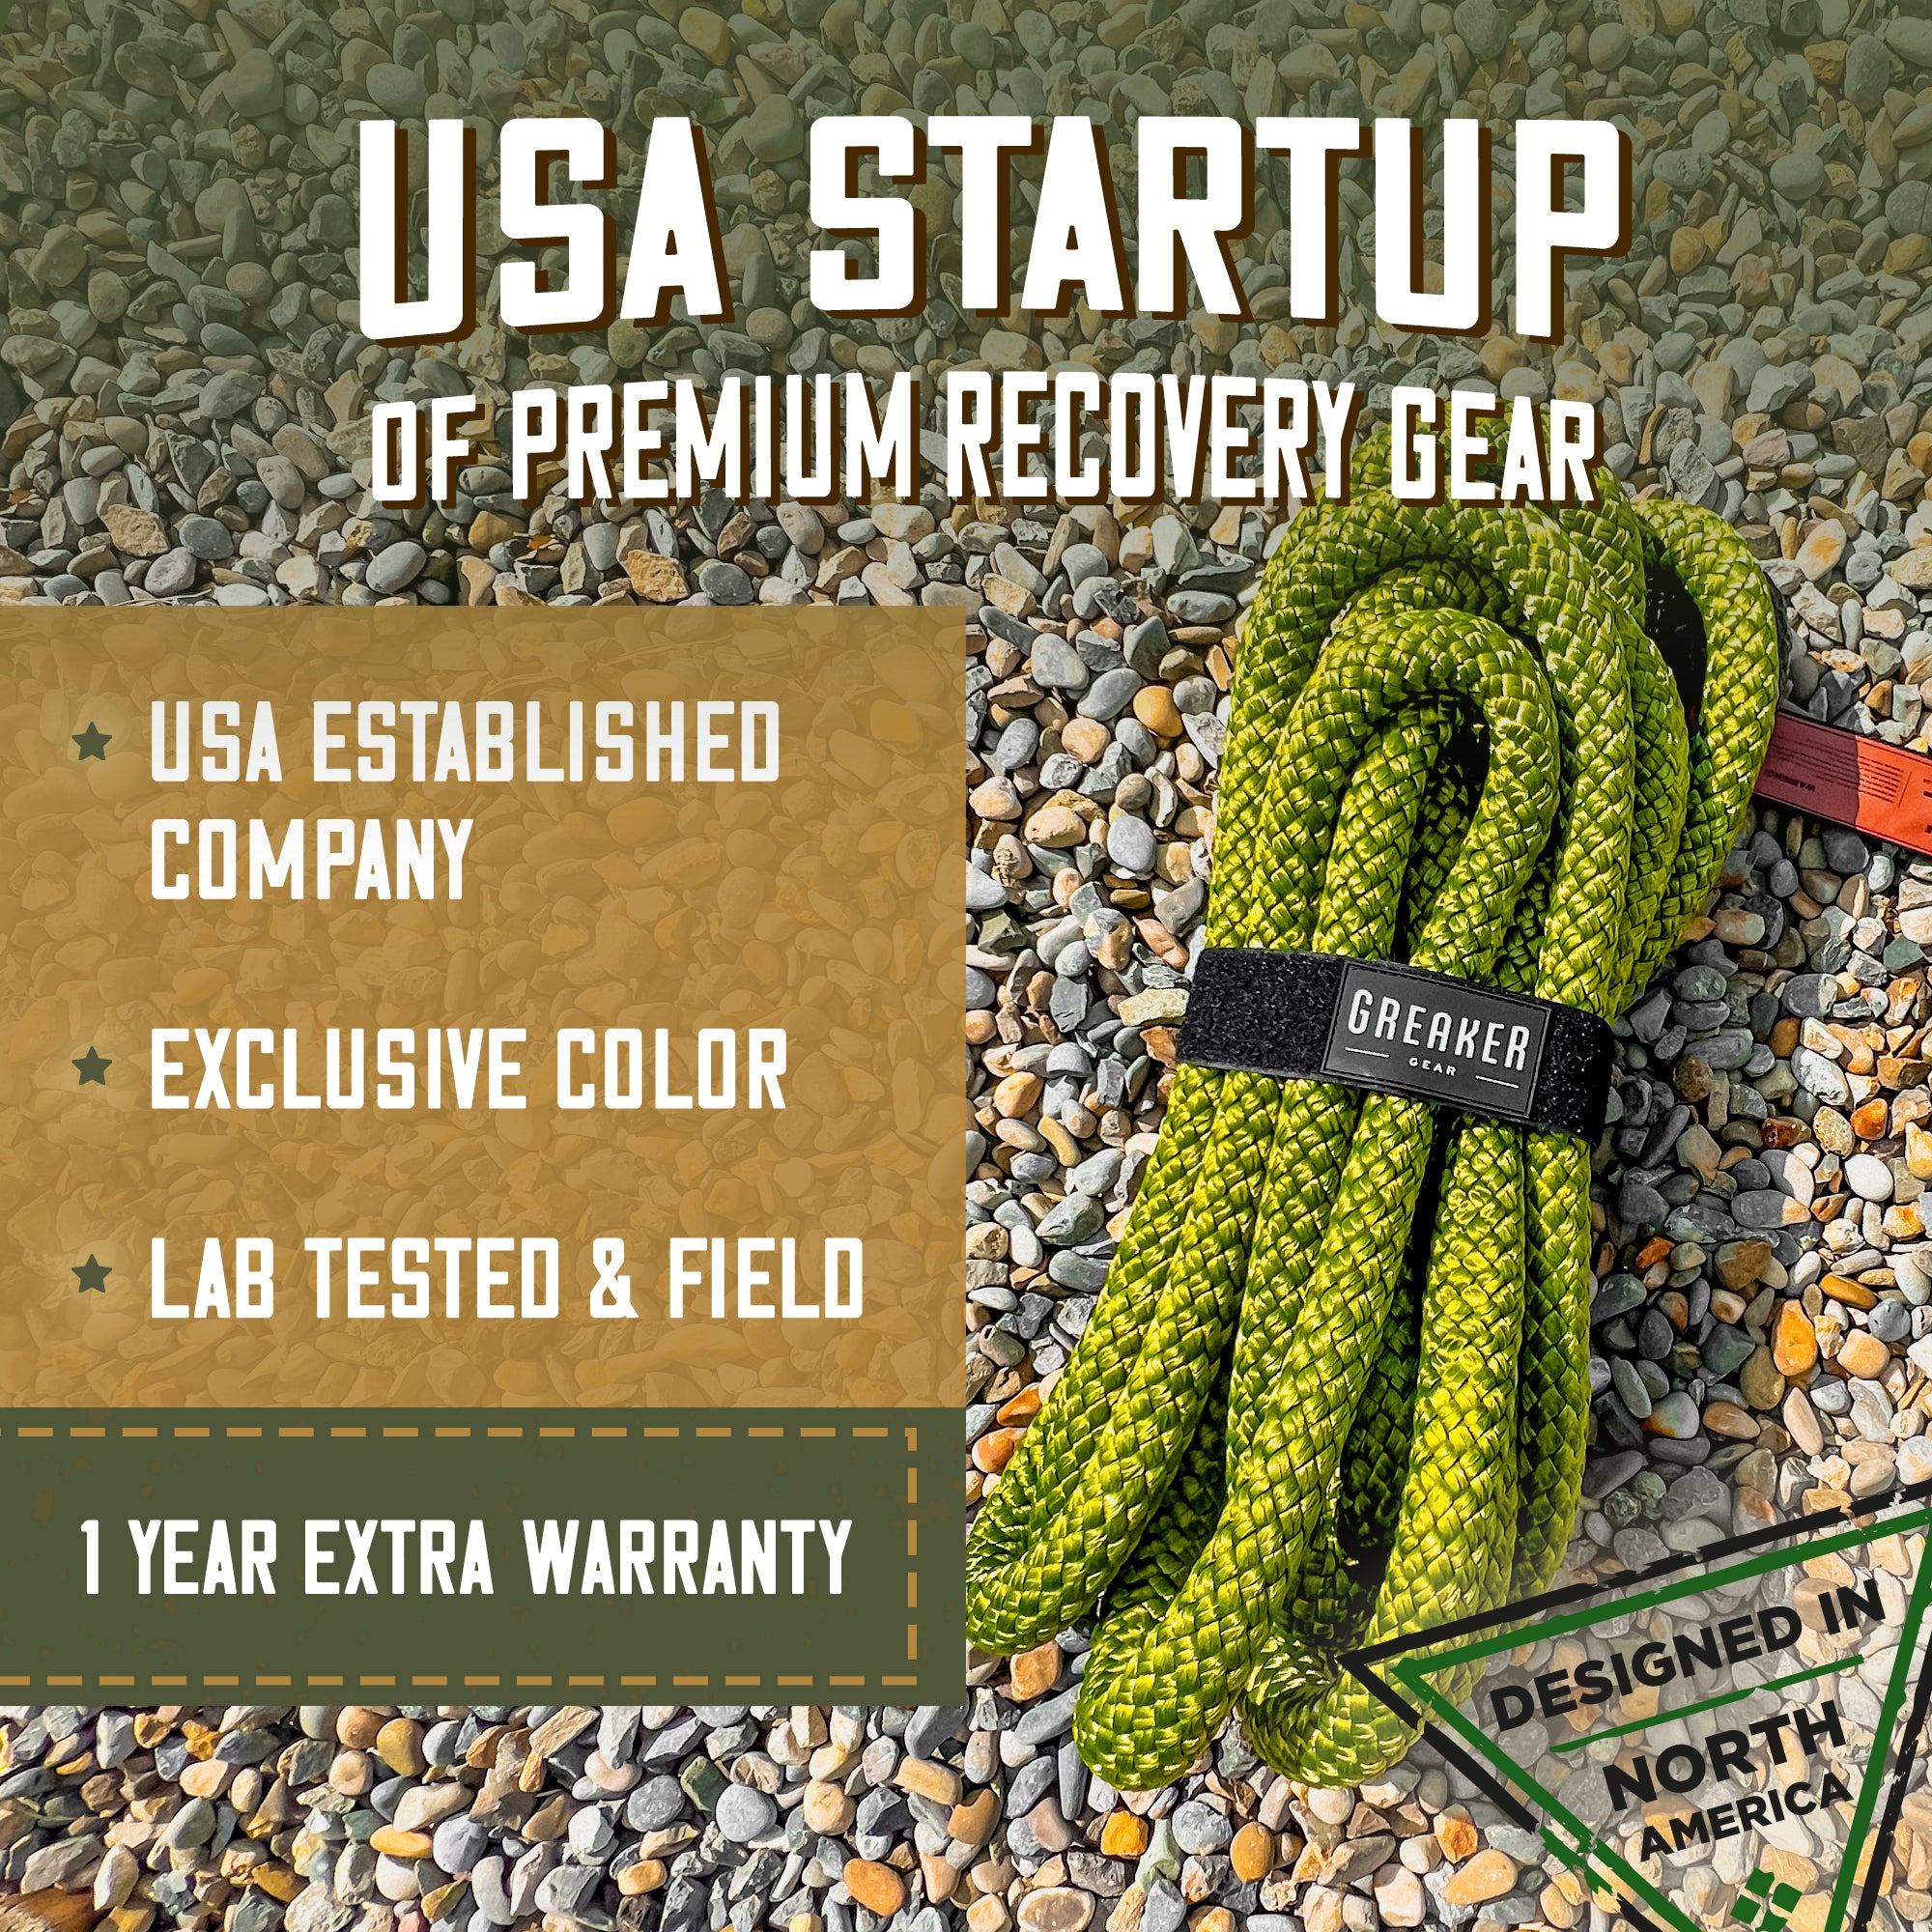 Limited Edition Greaker Kinetic Recovery Tow Rope Heavy Duty Offroad - Unique 4x4 Style (Marble Green, 1 x30')